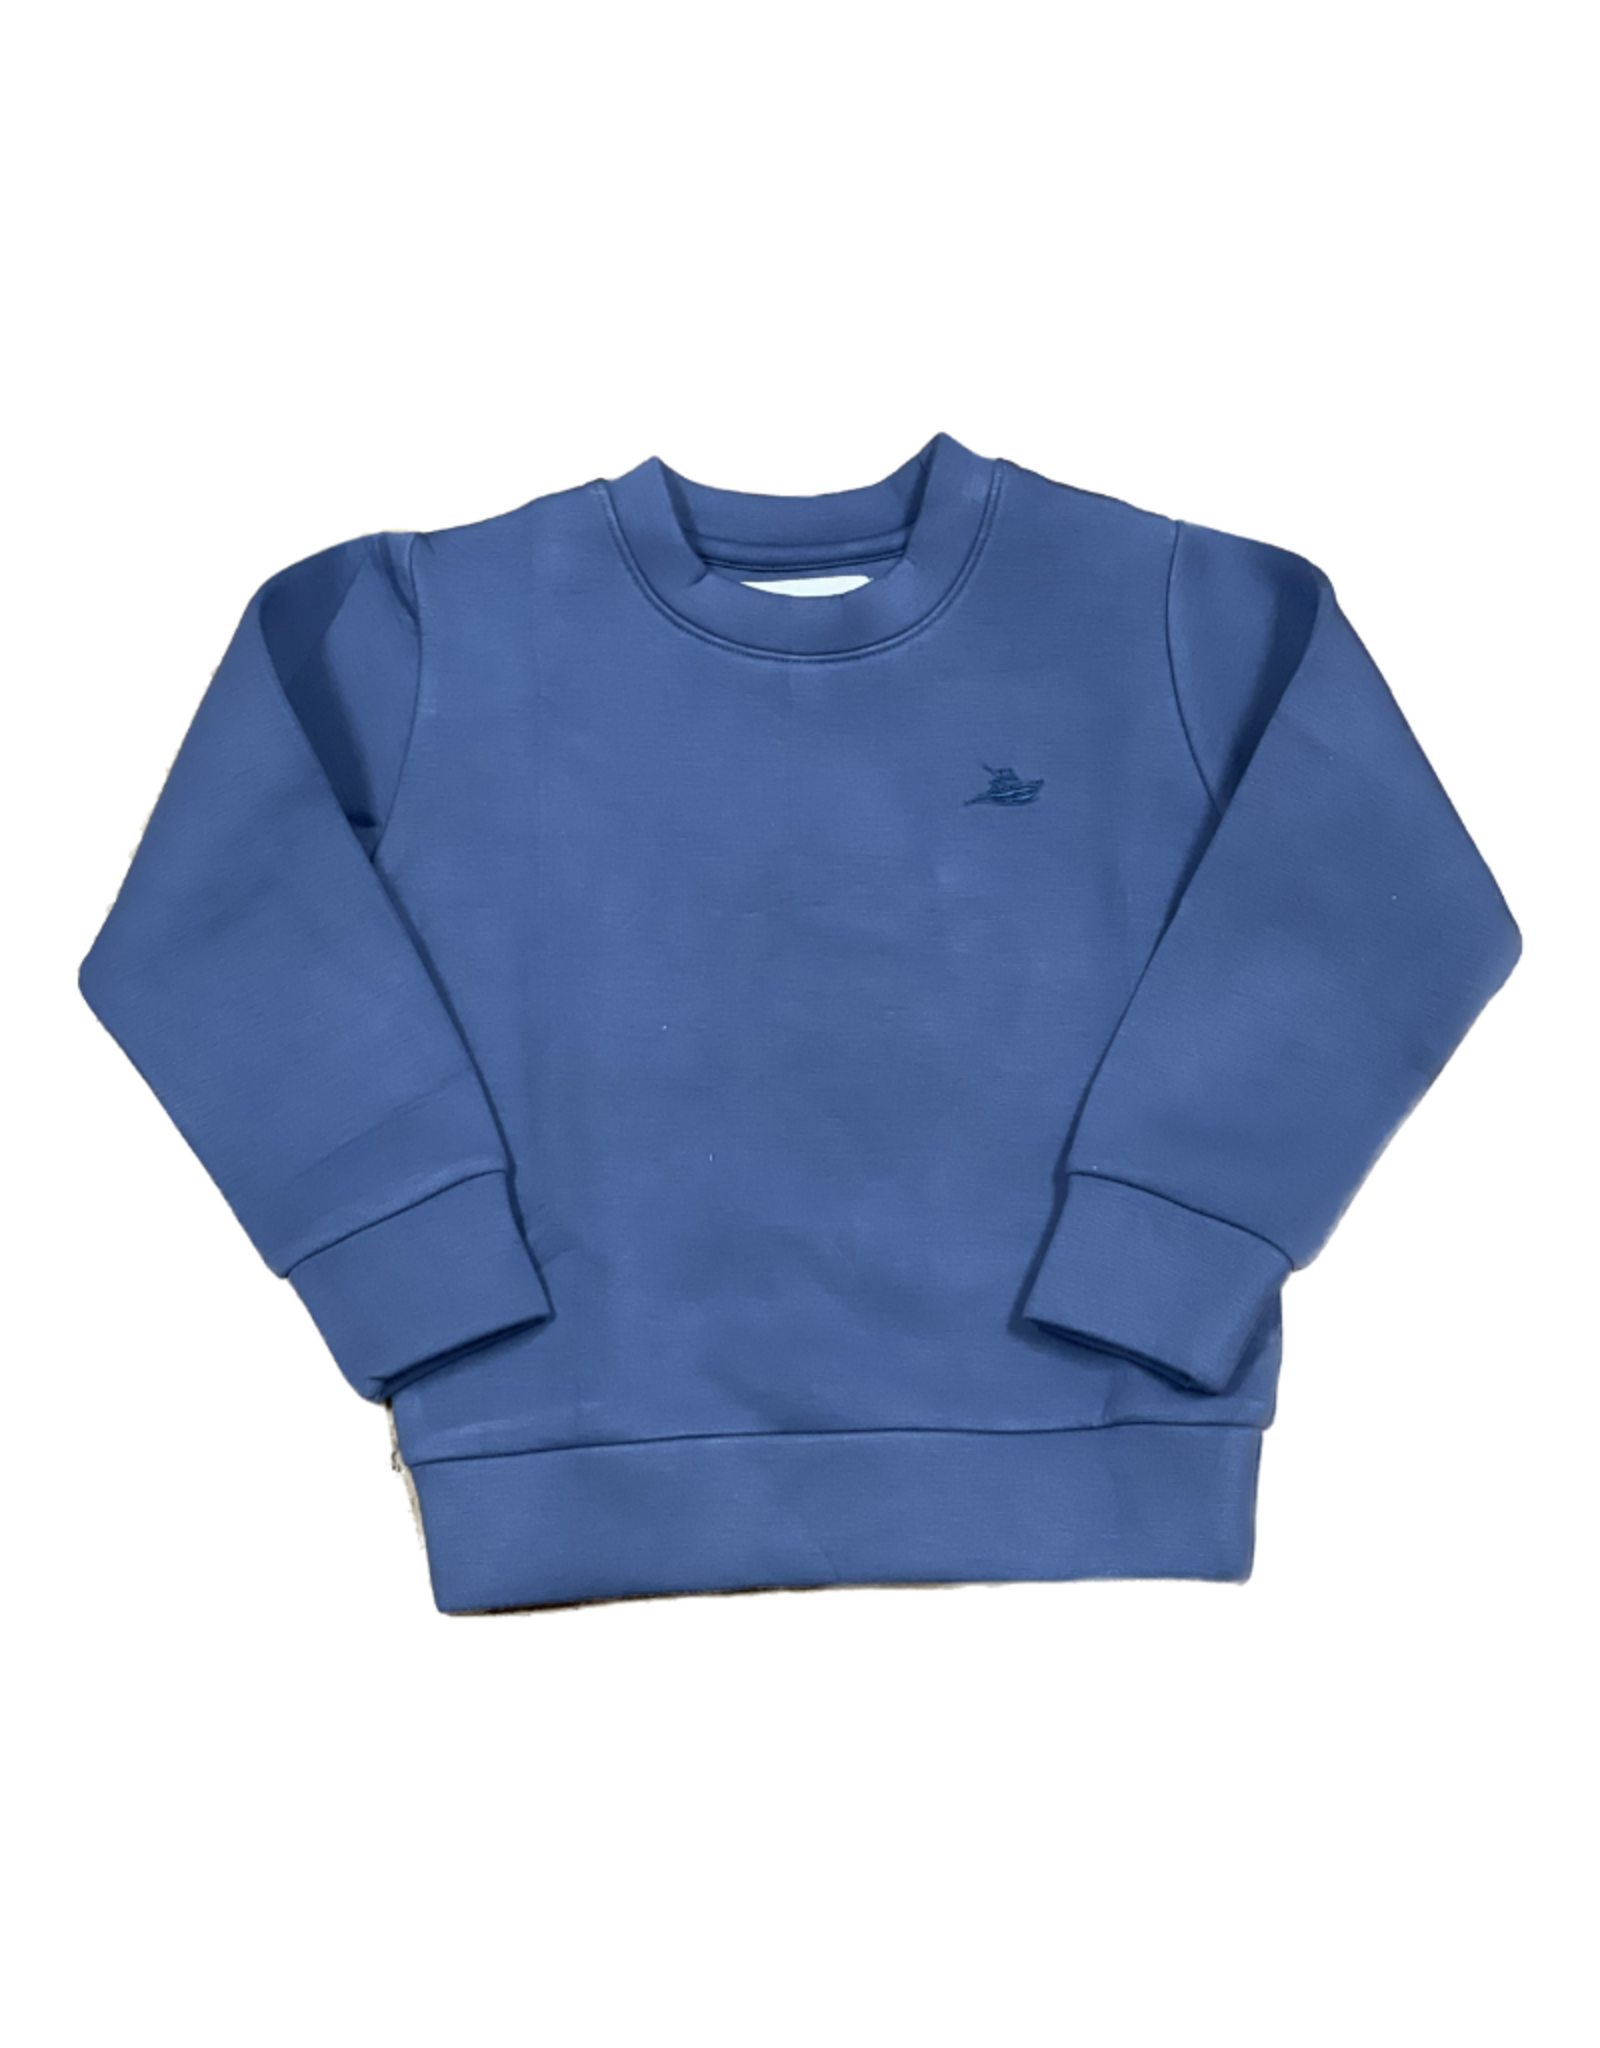 SouthBound Perfect Sweatshirt Classic Blue